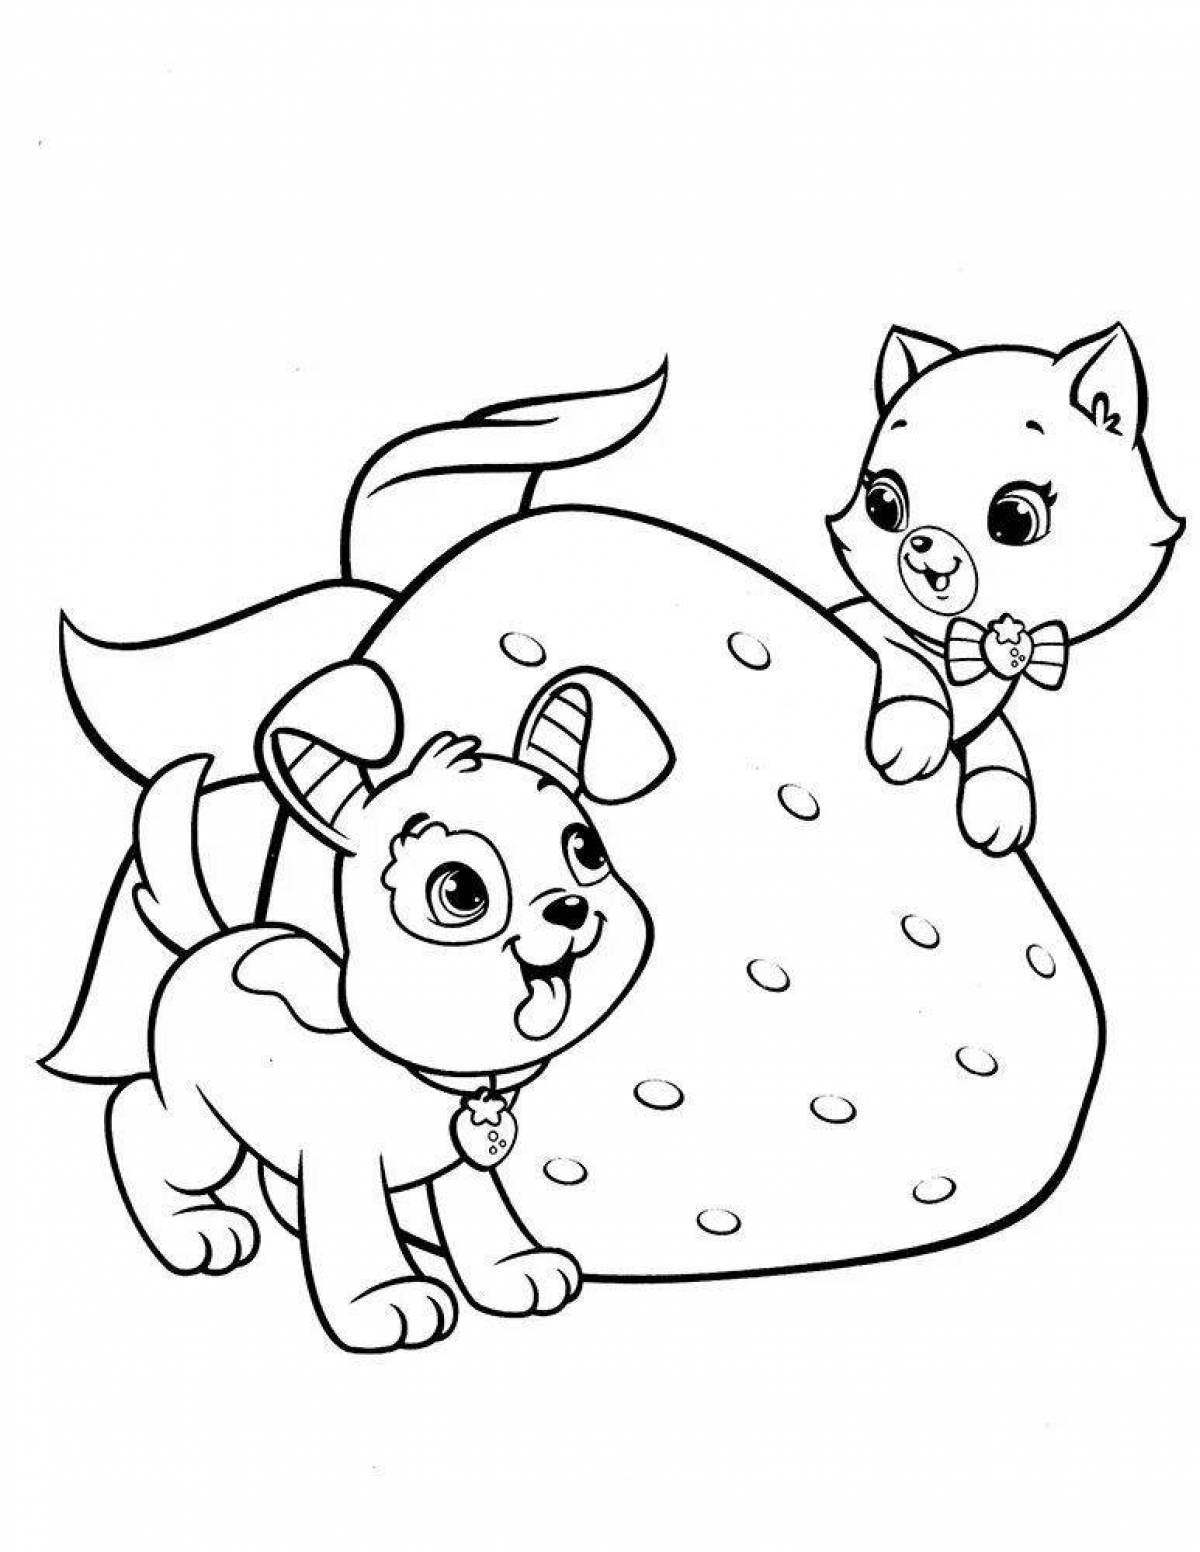 Coloring book fluffy kittens and puppies